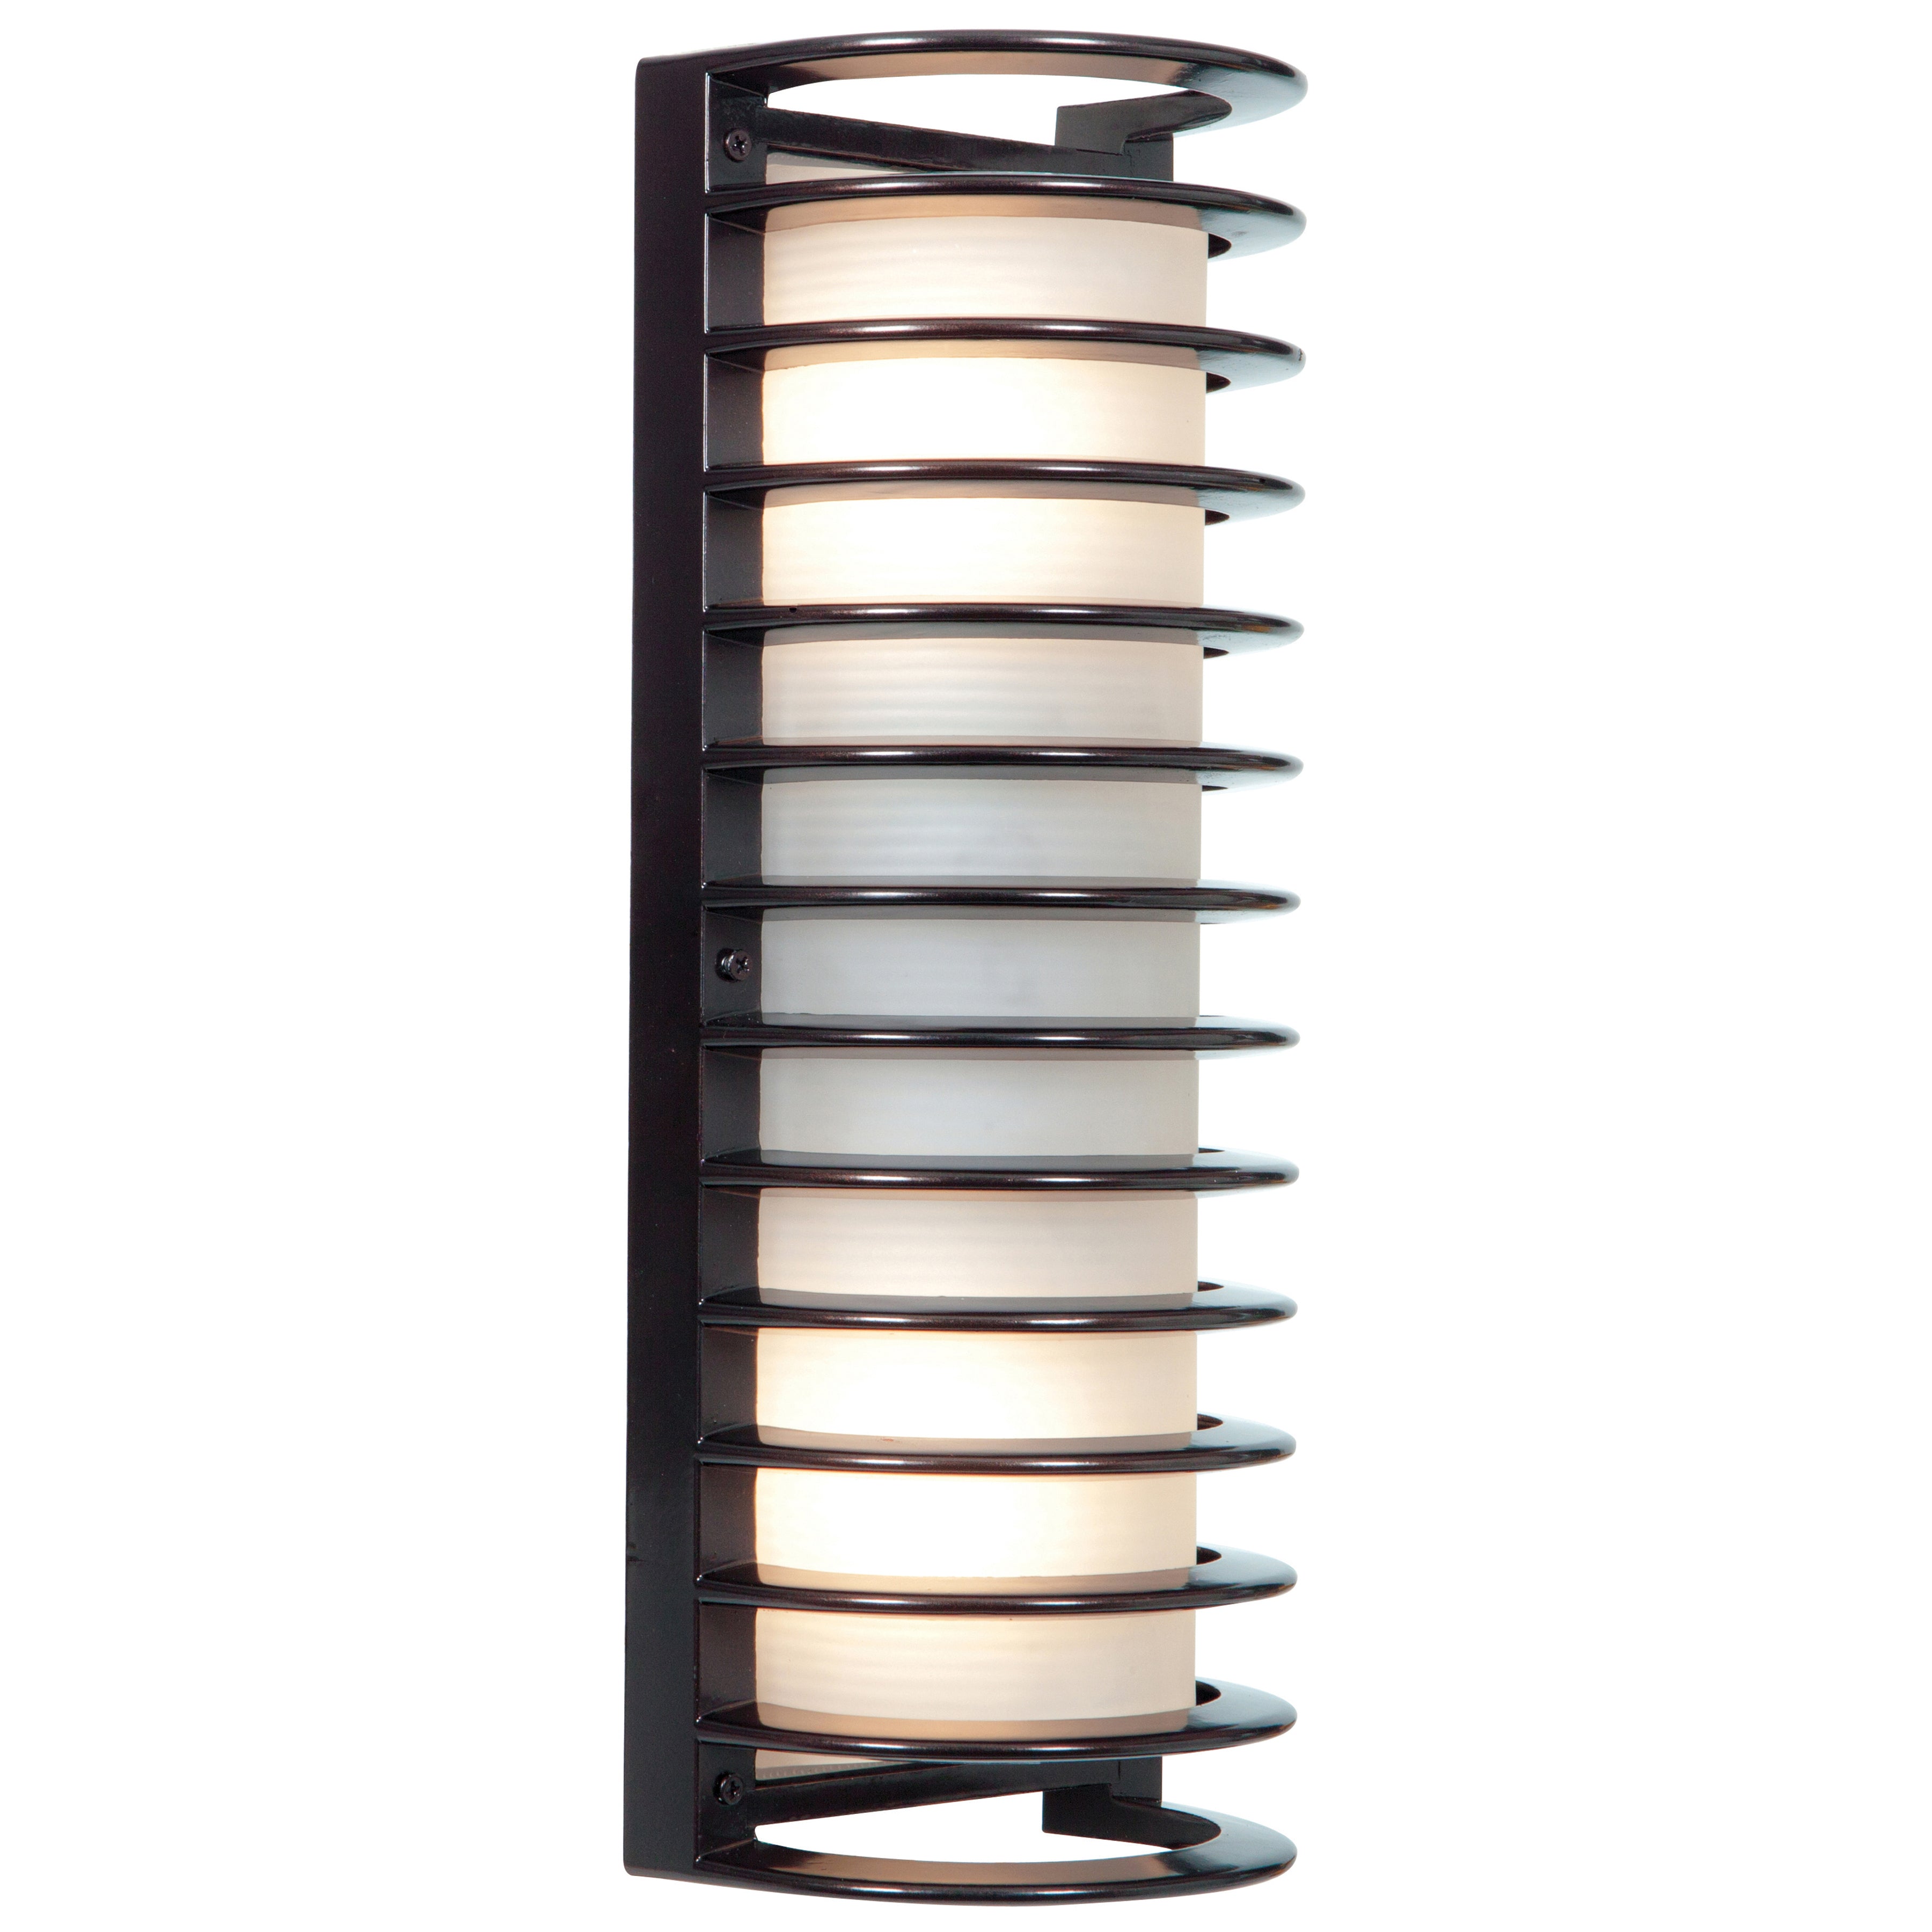 Bermuda 2 Light Outdoor LED Wall Mount Sconce